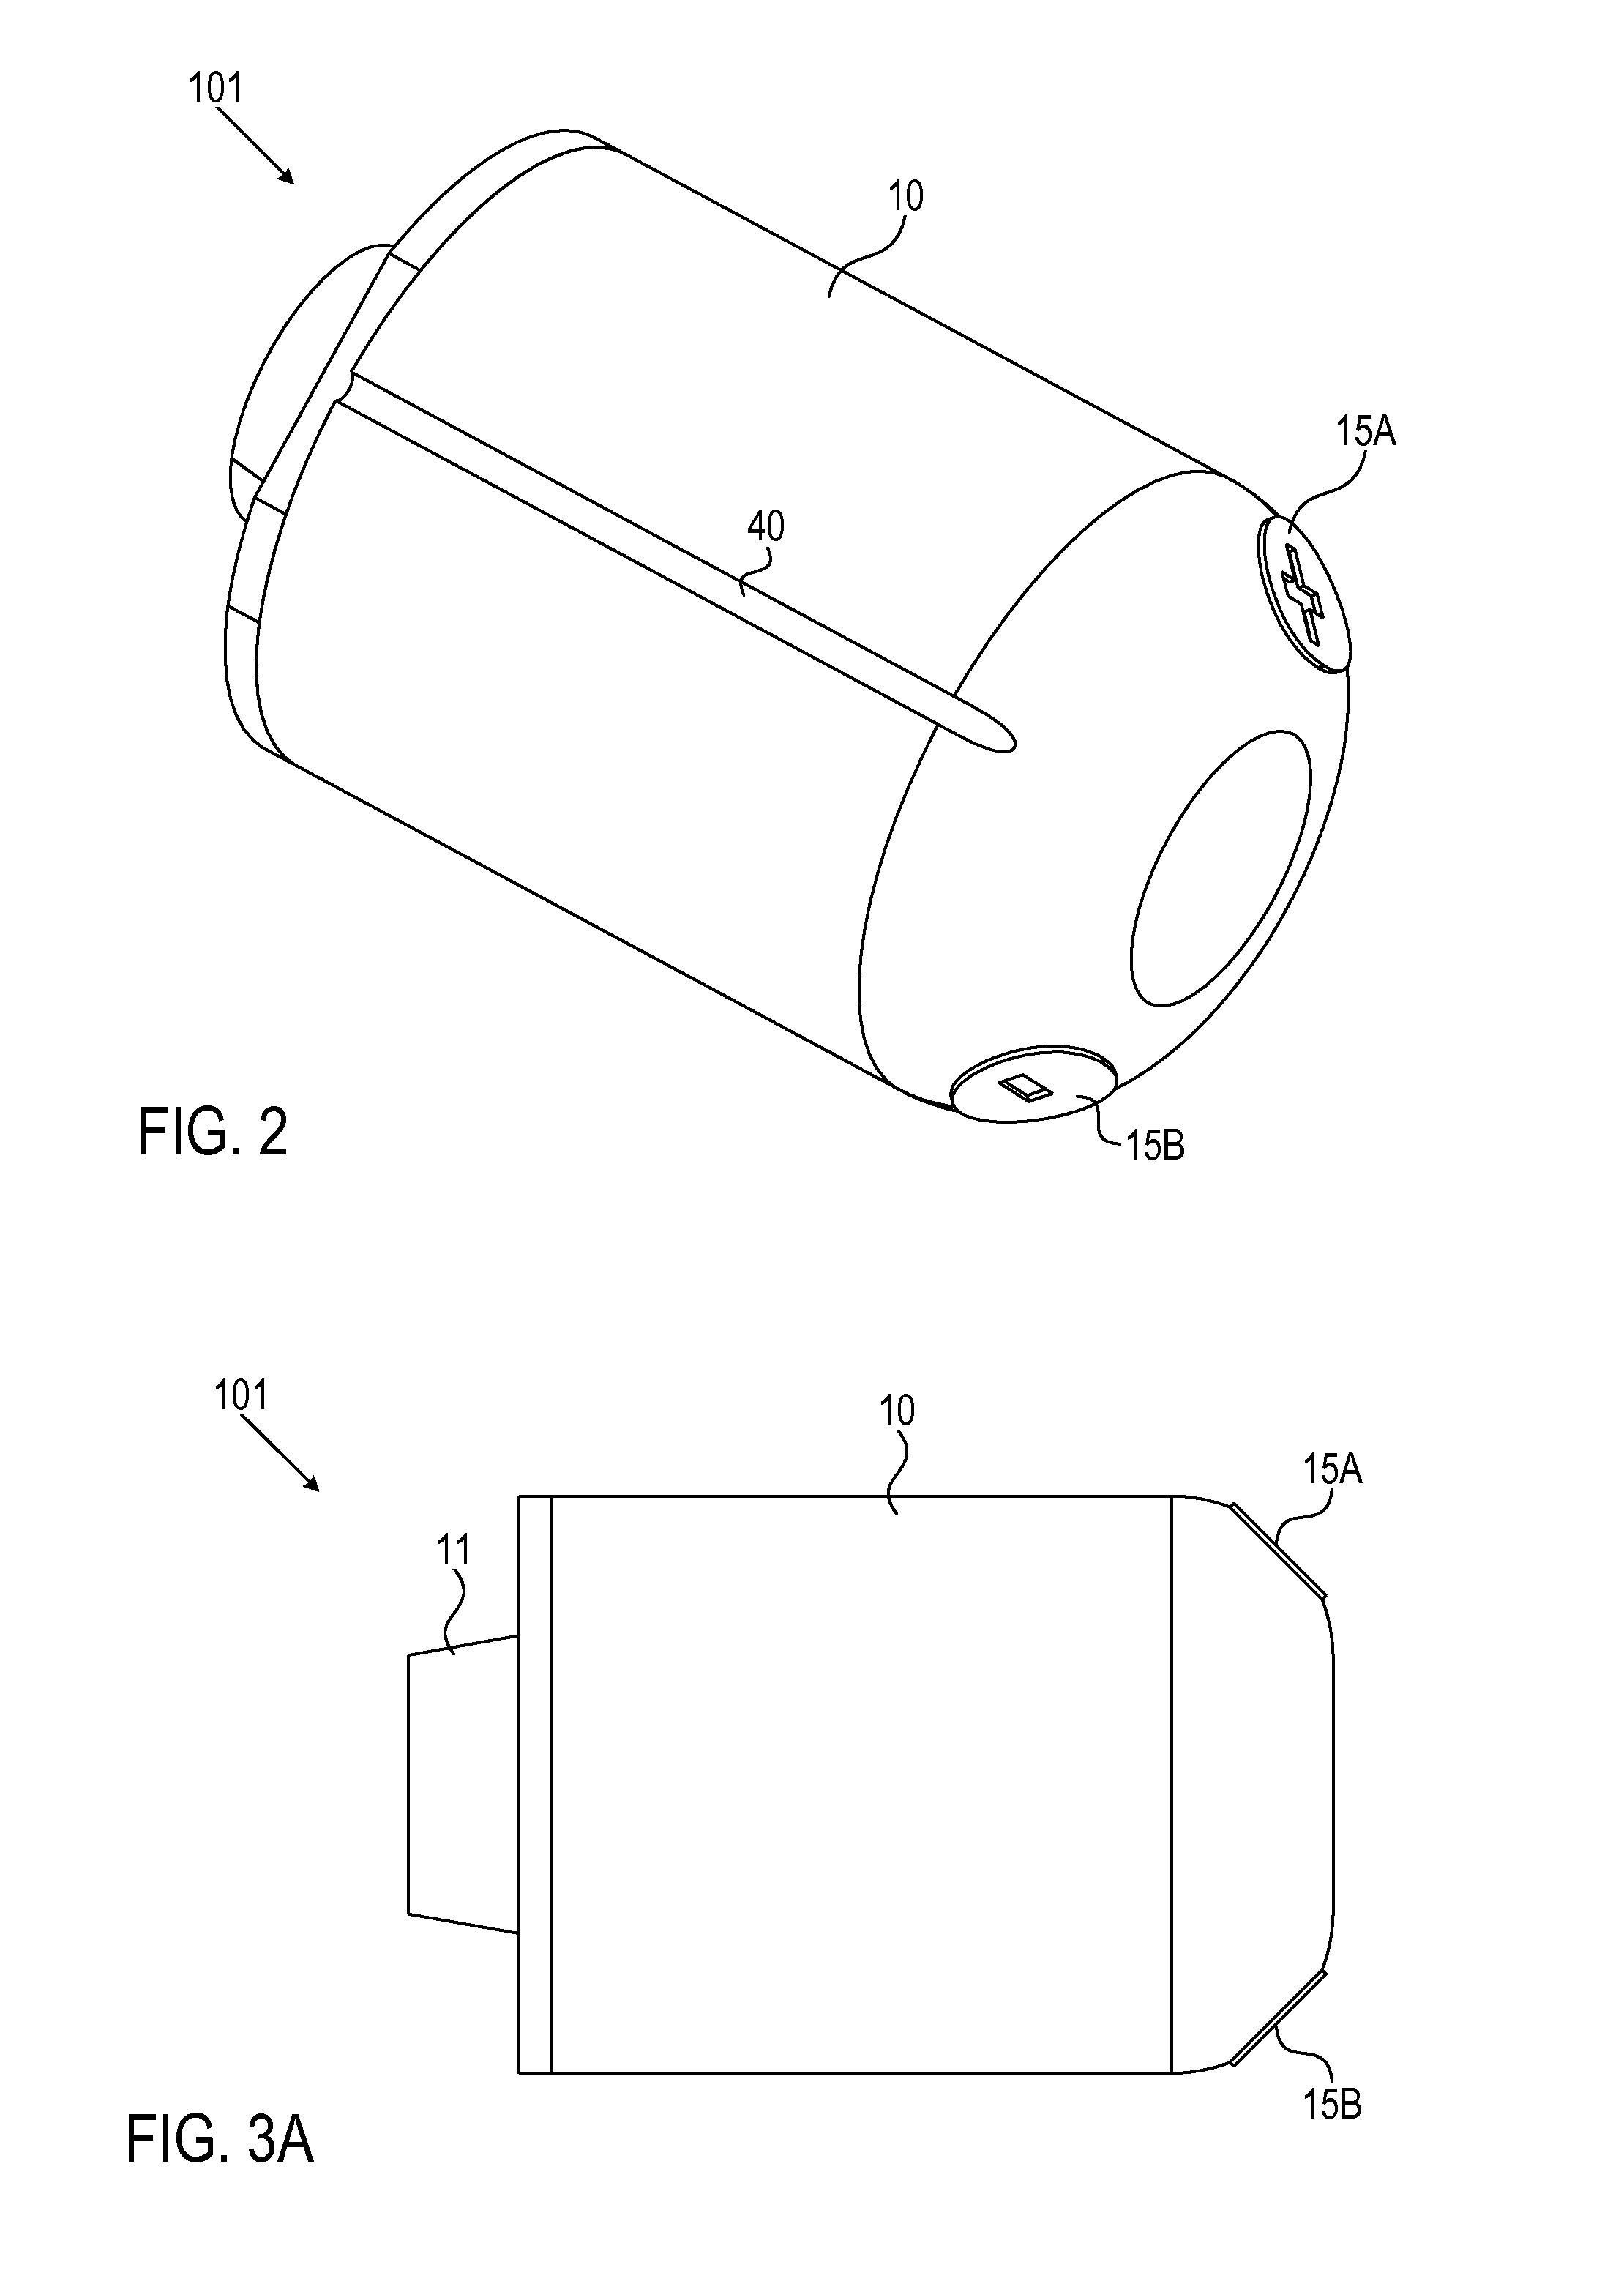 Reusable in-vivo device, system and method of assembly thereof